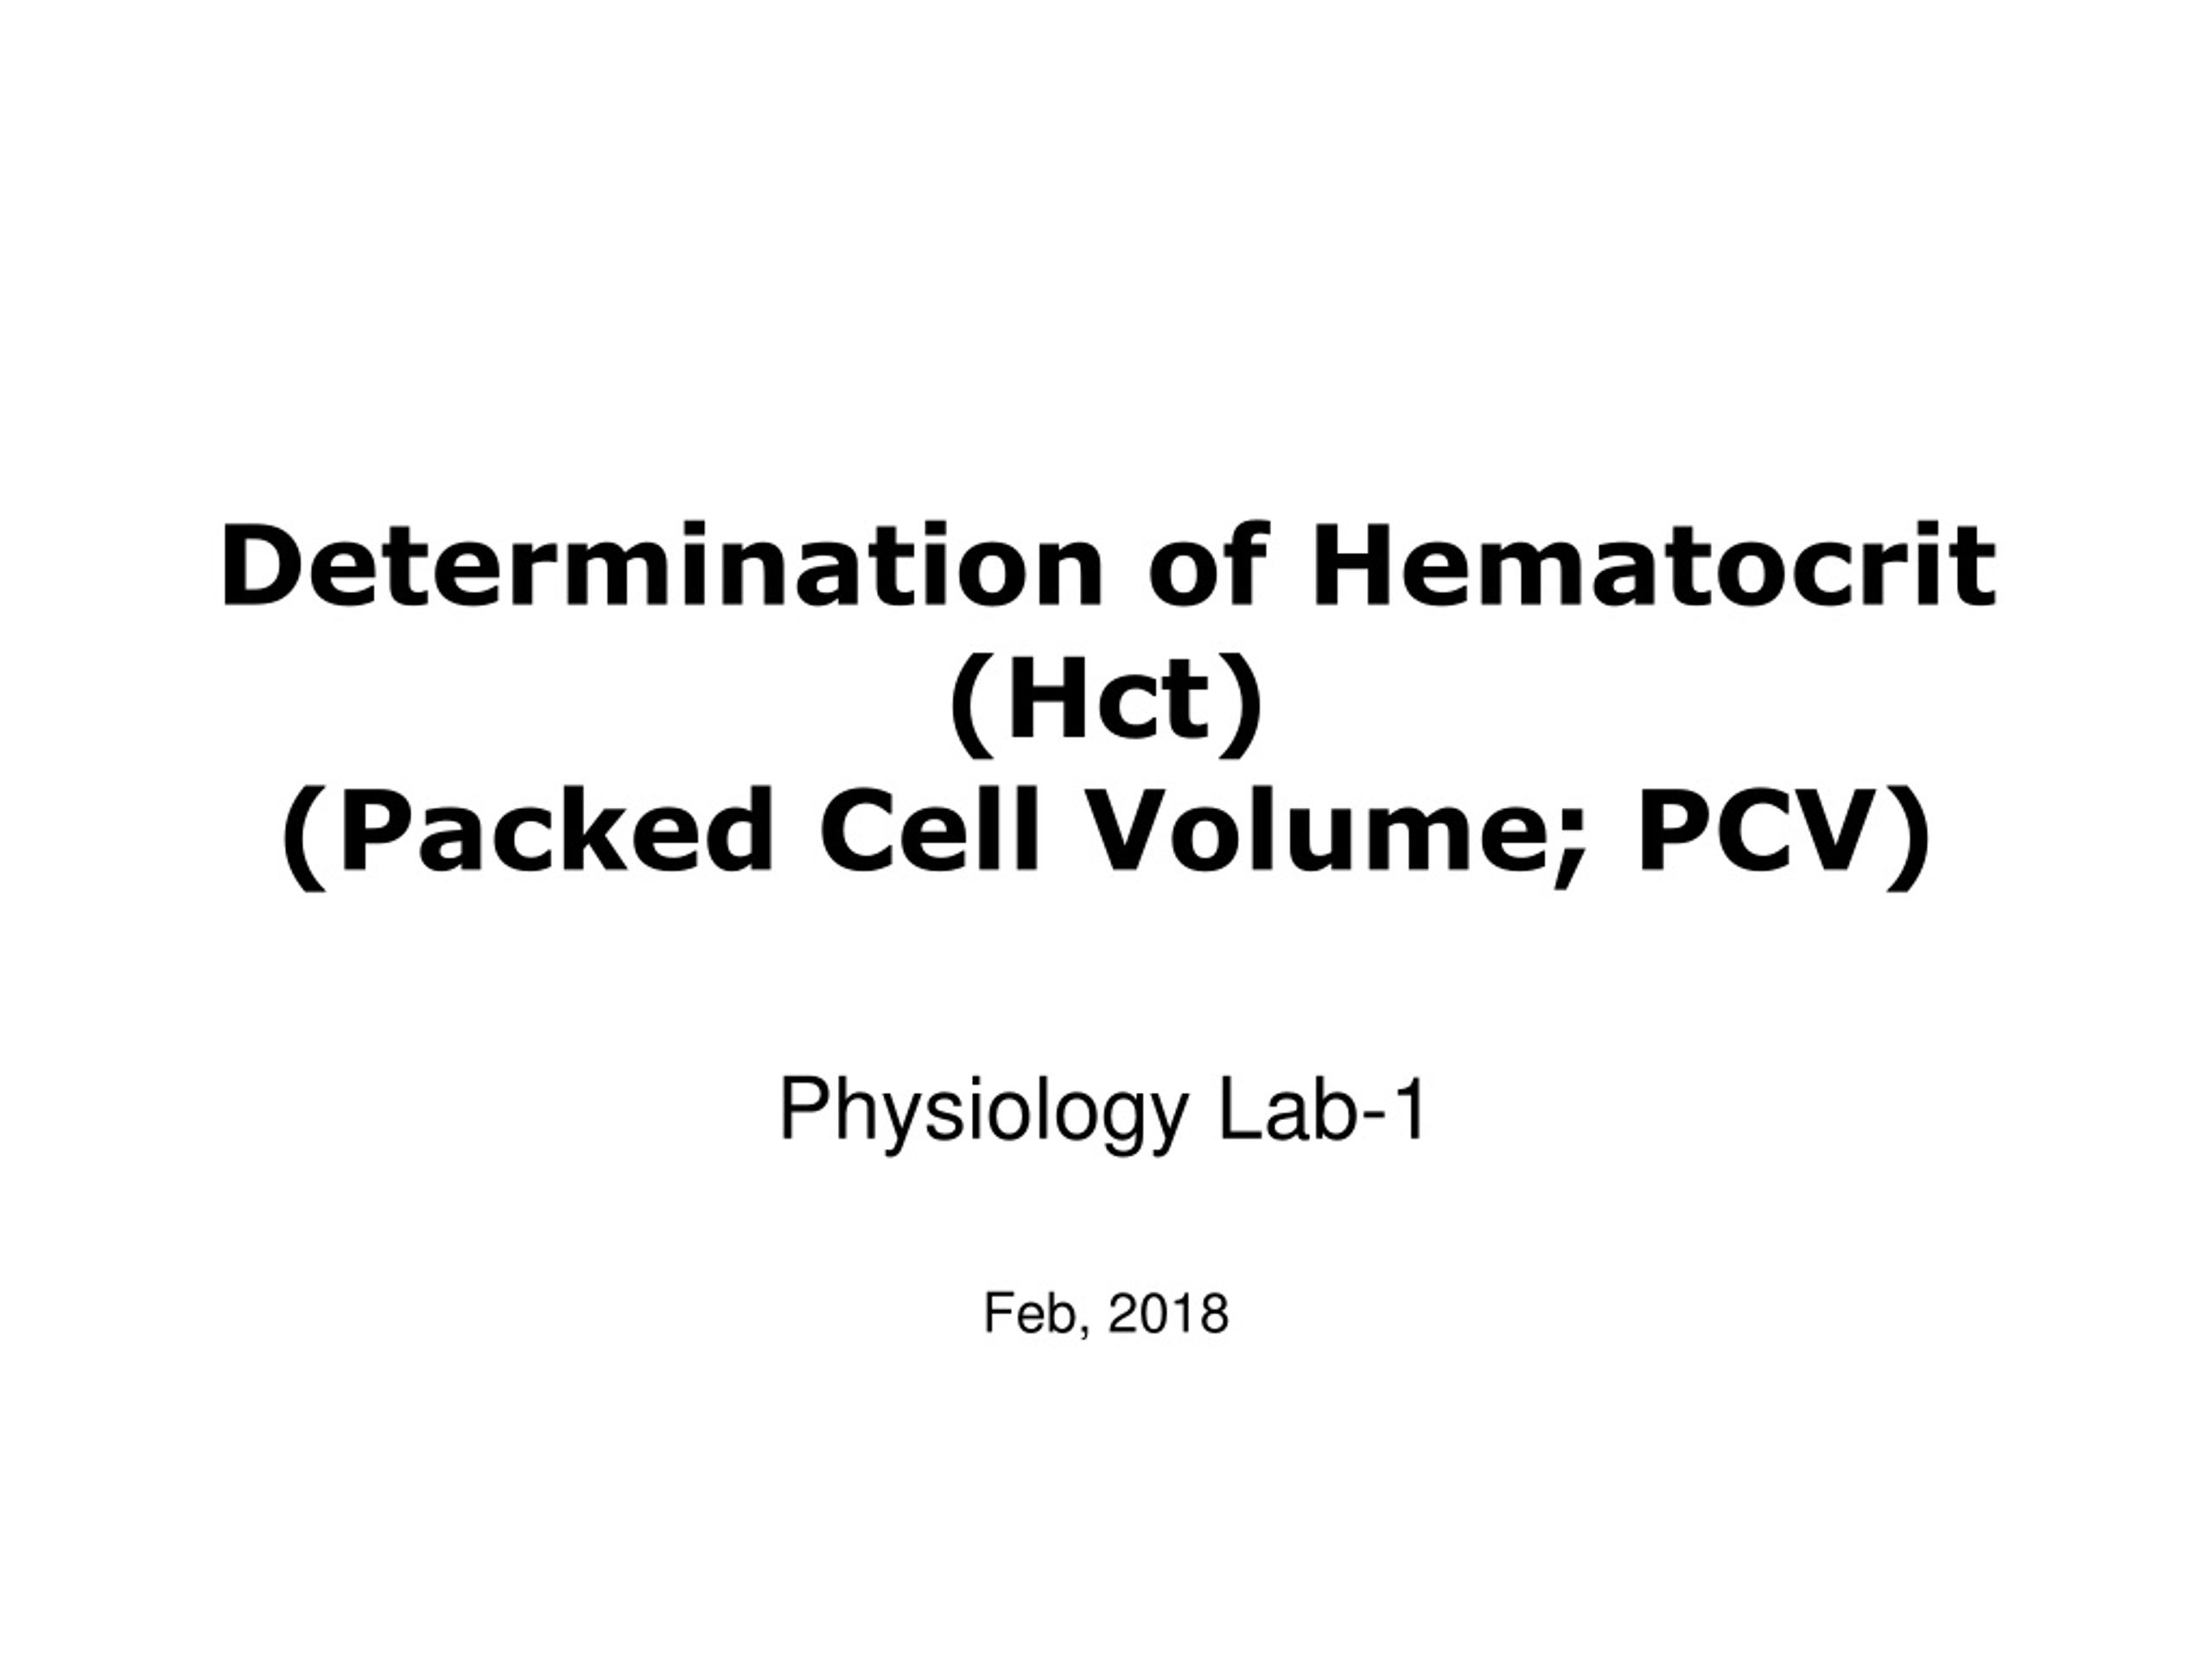 Ppt Determination Of Hematocrit Hct Packed Cell Volume Pcv Powerpoint Presentation Id 3420